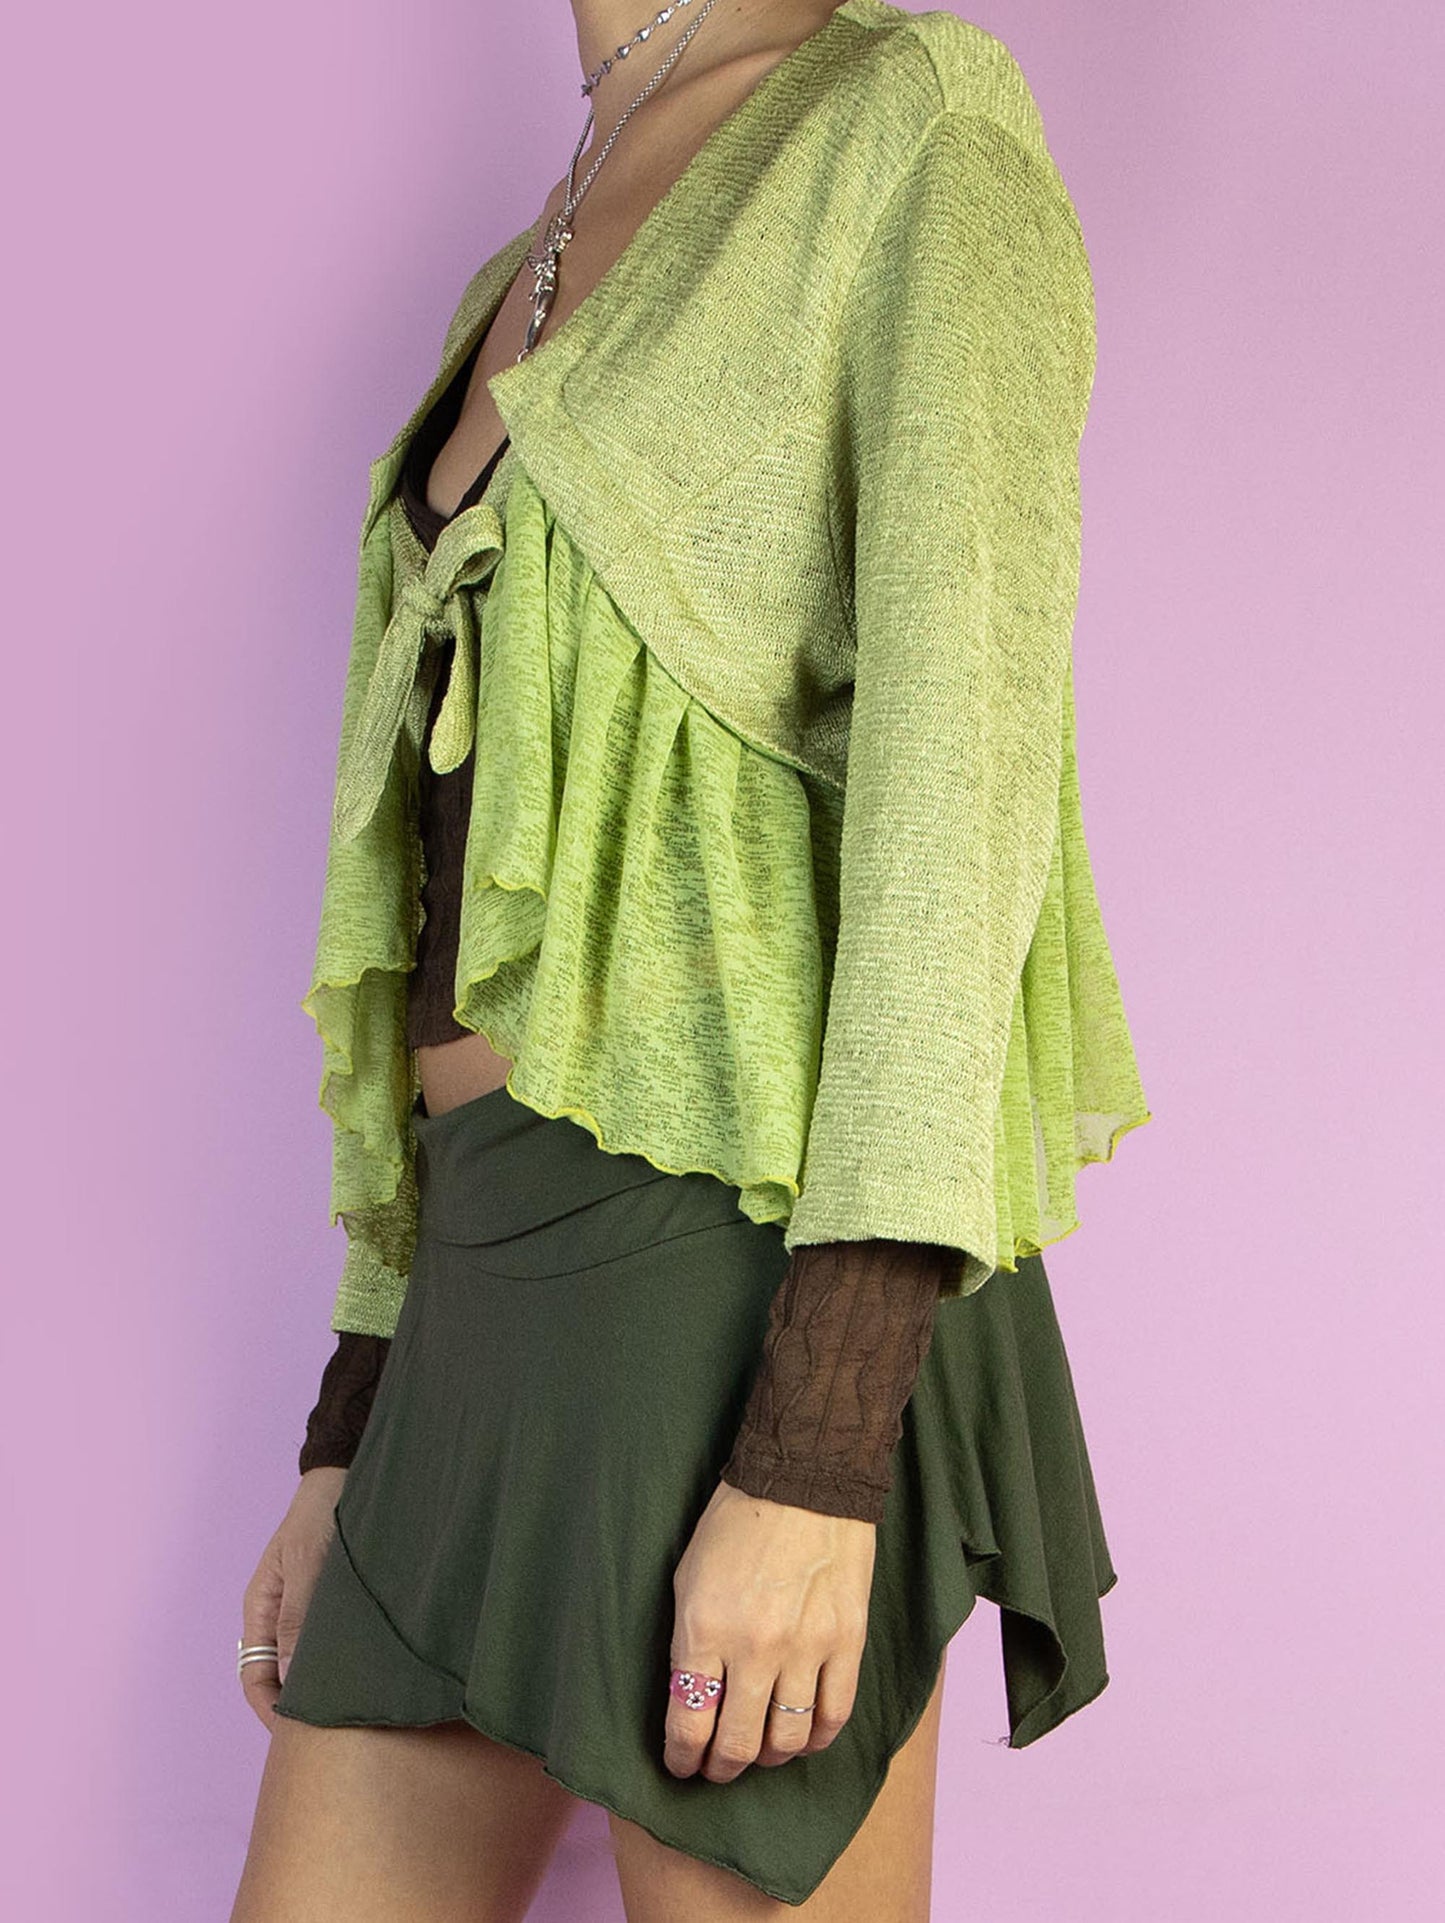 The Y2K Green Tie Bolero Jacket is a vintage three-quarter sleeve top that ties at the front and features a semi-sheer mesh ruffle detail. Boho fairy 2000s avant garde knit shrug.